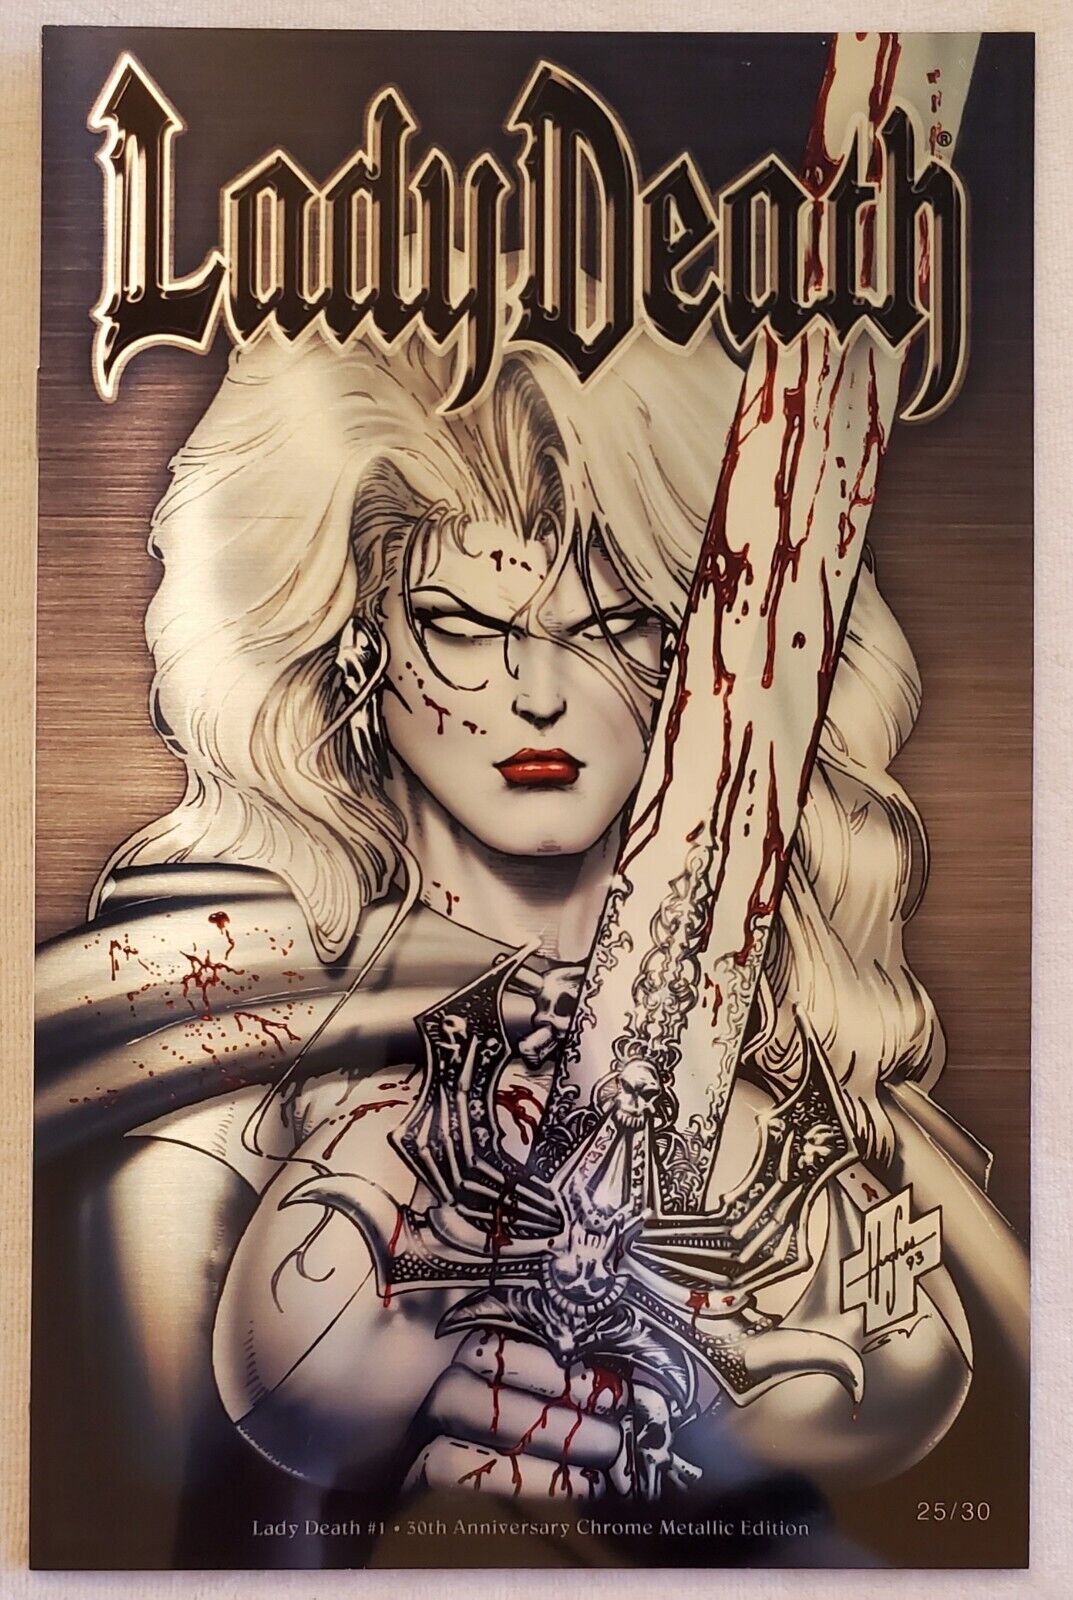 Lady Death: The Reckoning 30th Anniversary Chrome Metal Edition, Steven Hughes